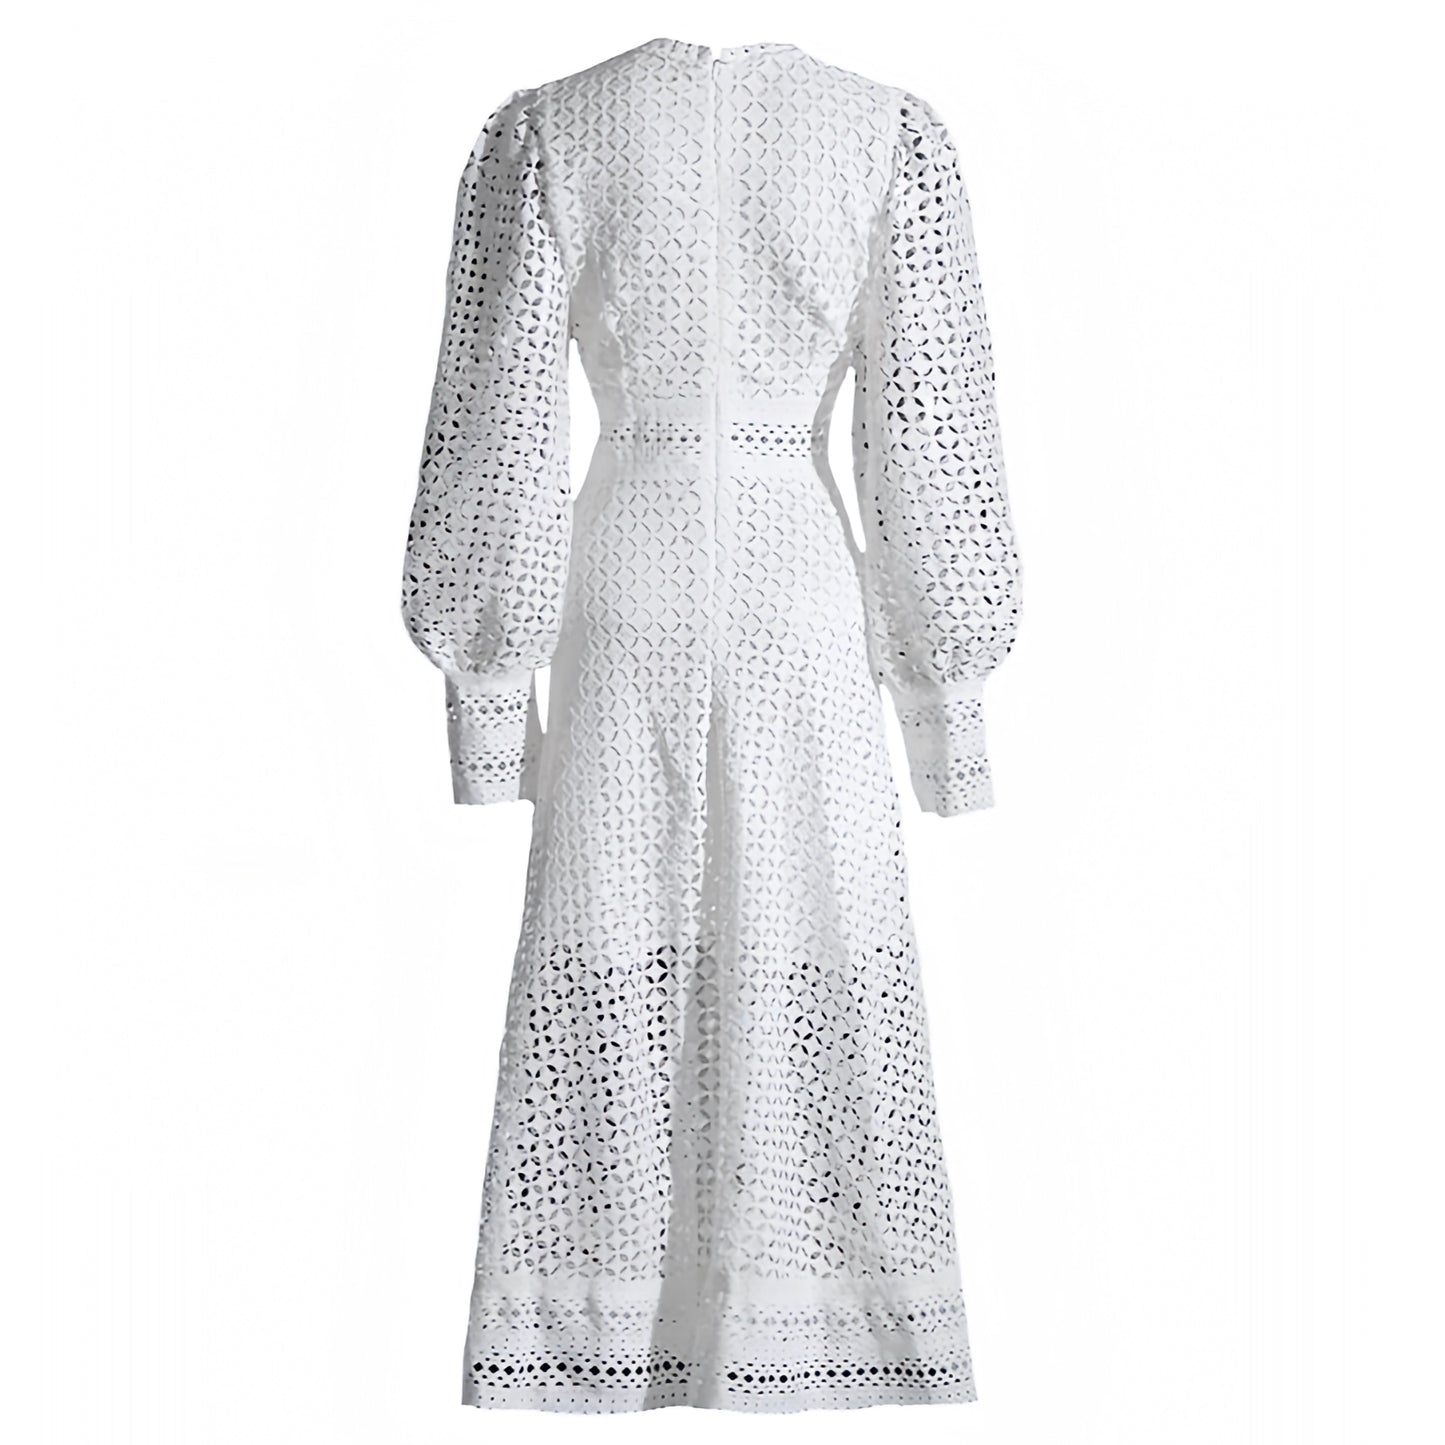 white-ivory-eyelet-embroidered-patterned-slim-fit-bodycon-fitted-drop-waist-round-neck-cut-out-open-back-backless-long-puff-sleeve-flowy-tiered-boho-linen-midi-maxi-dress-ball-gown-couture-women-ladies-chic-trendy-spring-2024-summer-semi-formal-elegant-casual-classy-feminine-prom-gala-preppy-style-debutante-wedding-guest-party-european-beach-vacation-sundress-zimmerman-revolve-loveshackfancy